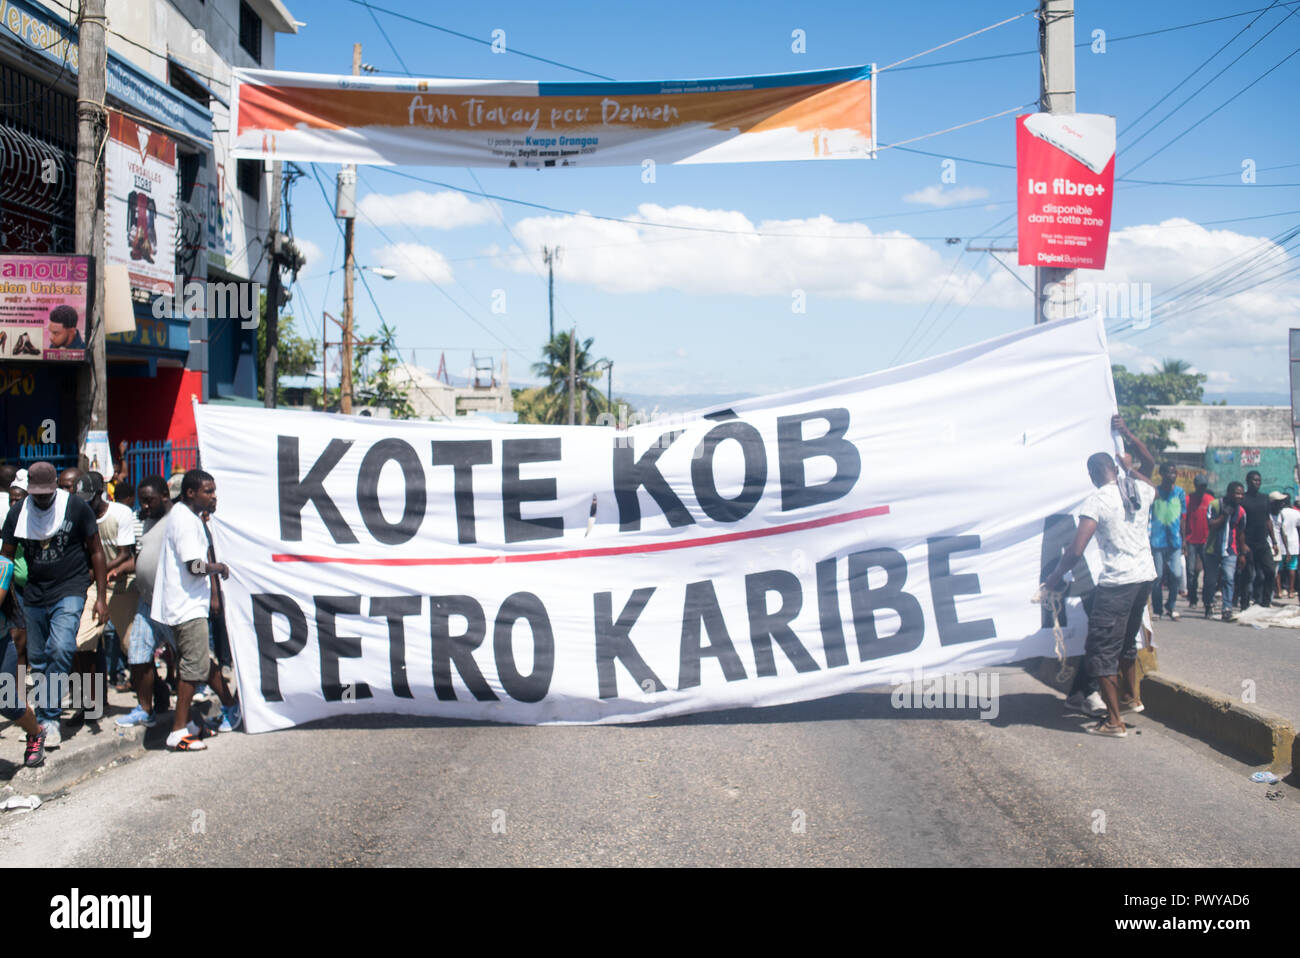 October 17, 2018 - Port-Au-Prince, Ouest, Haiti - Protesters seen holding a banner as they gathered to demonstrate against the $3.8 billion that the government and private firms have been accused of embezzling from Venezuela's subsidized PetroCaribe oil program. The revenue was supposed to go toward financing economic and social programs. The PetroCaribe Challenge was started after Haitian filmmaker Gilbert Mirambeau Jr. posted on social media asking: 'Kot KÃ²b PetroCaribe a,'' or 'Where did the PetroCaribe money go?'' With a large youth, grassroots base nationwide demonstrations acros Stock Photo